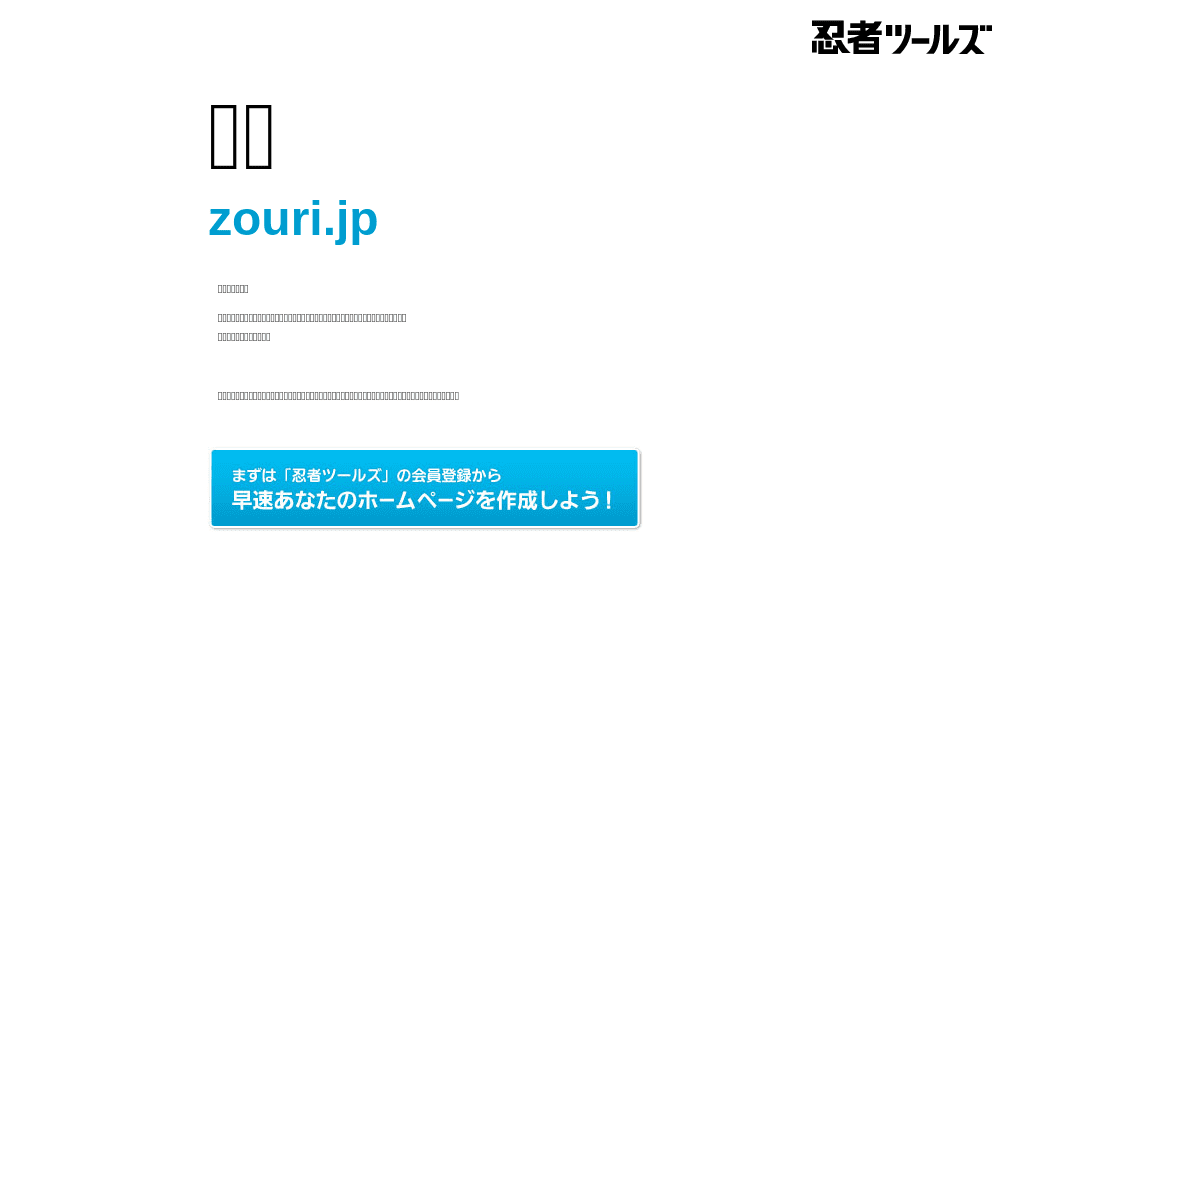 A complete backup of https://zouri.jp